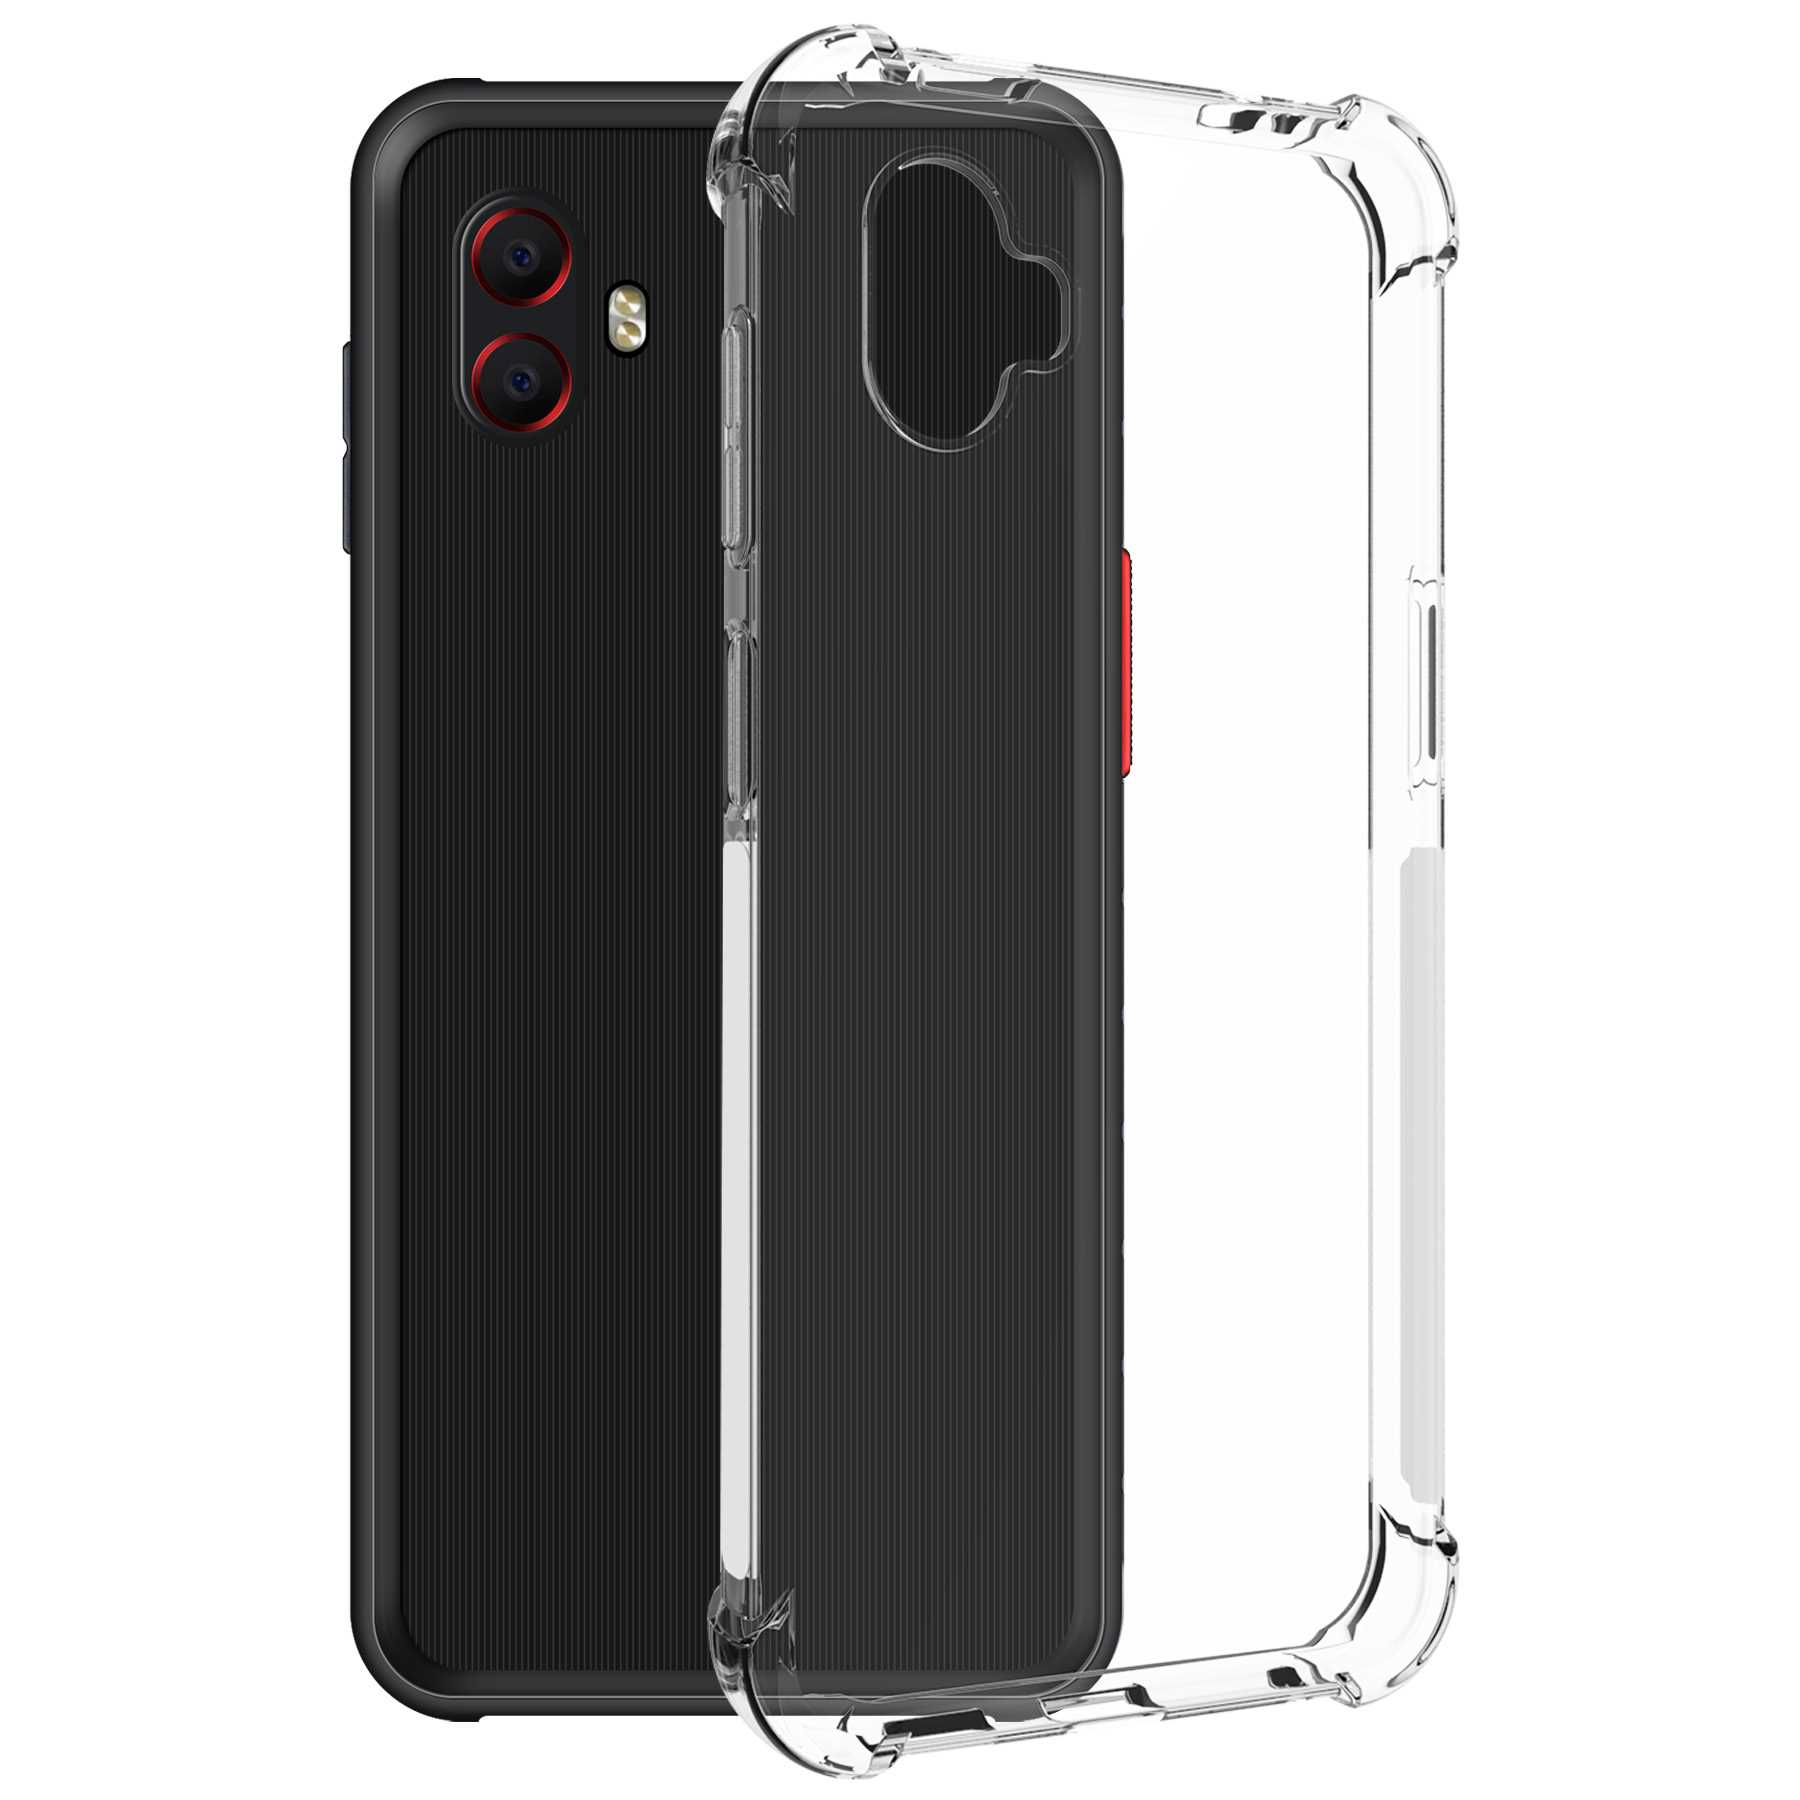 5G, ENERGY MORE Pro Transparent Case, MTB Galaxy Samsung, Backcover, Clear Xcover6 Armor